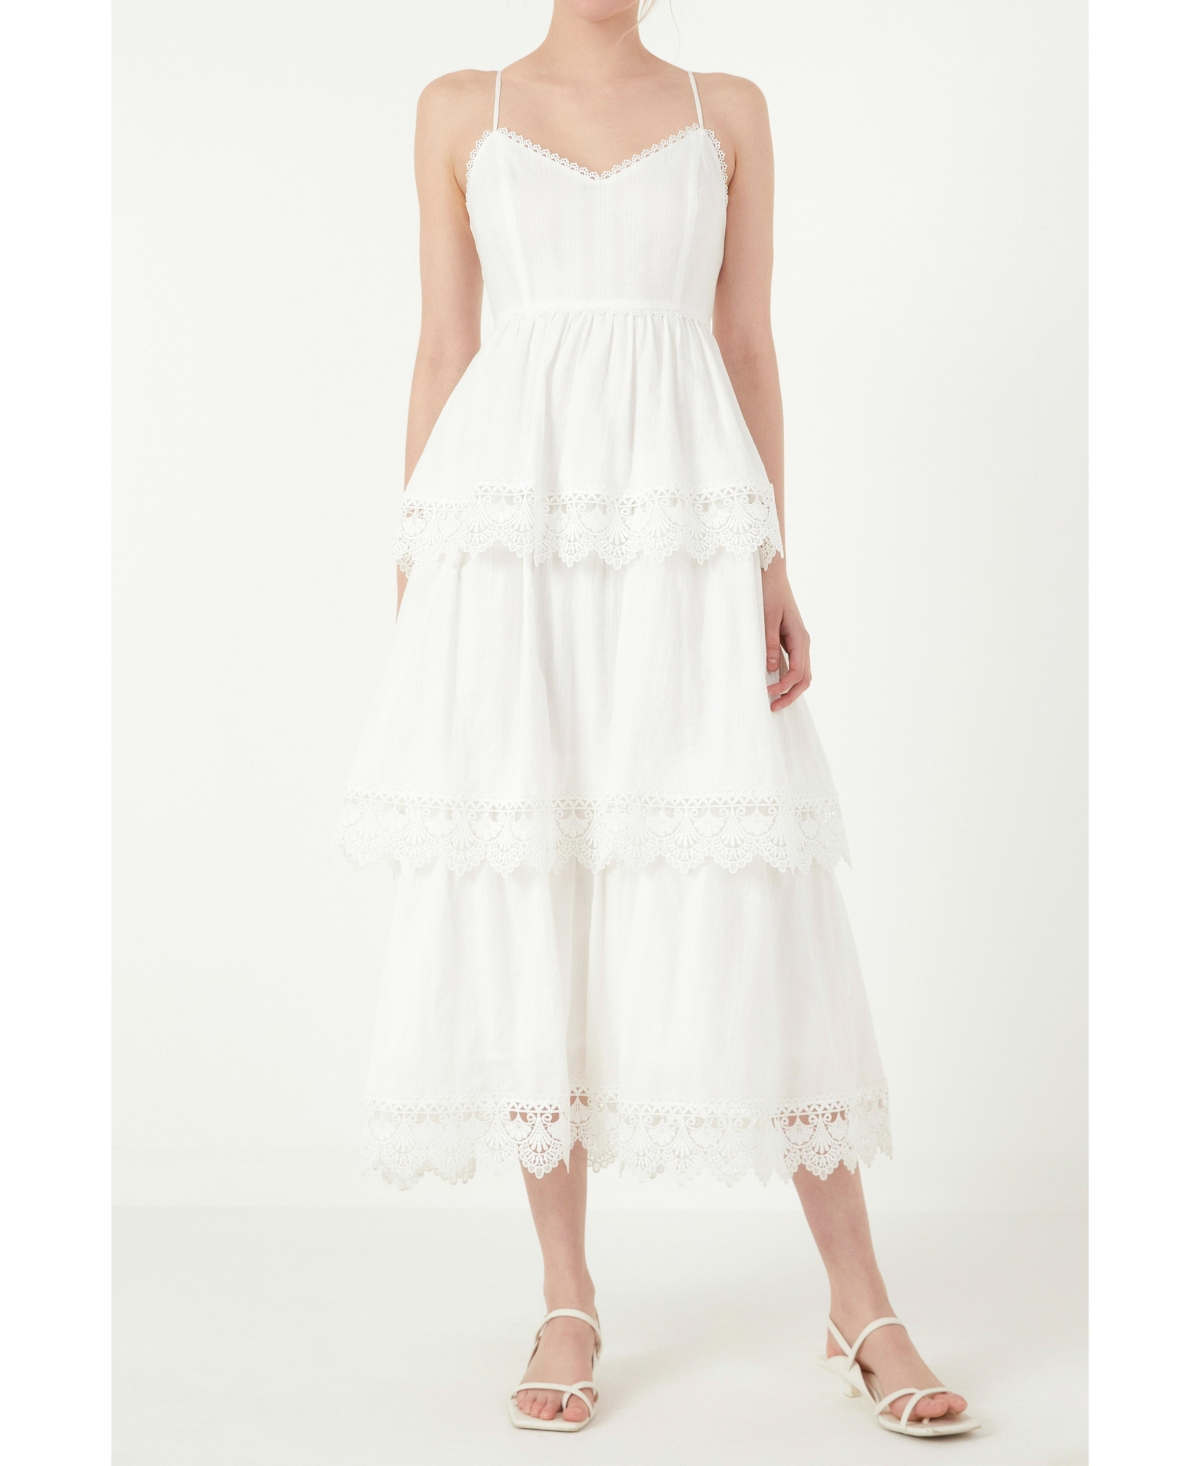 Women's Floral Lace Tiered Trim Maxi Dress - White